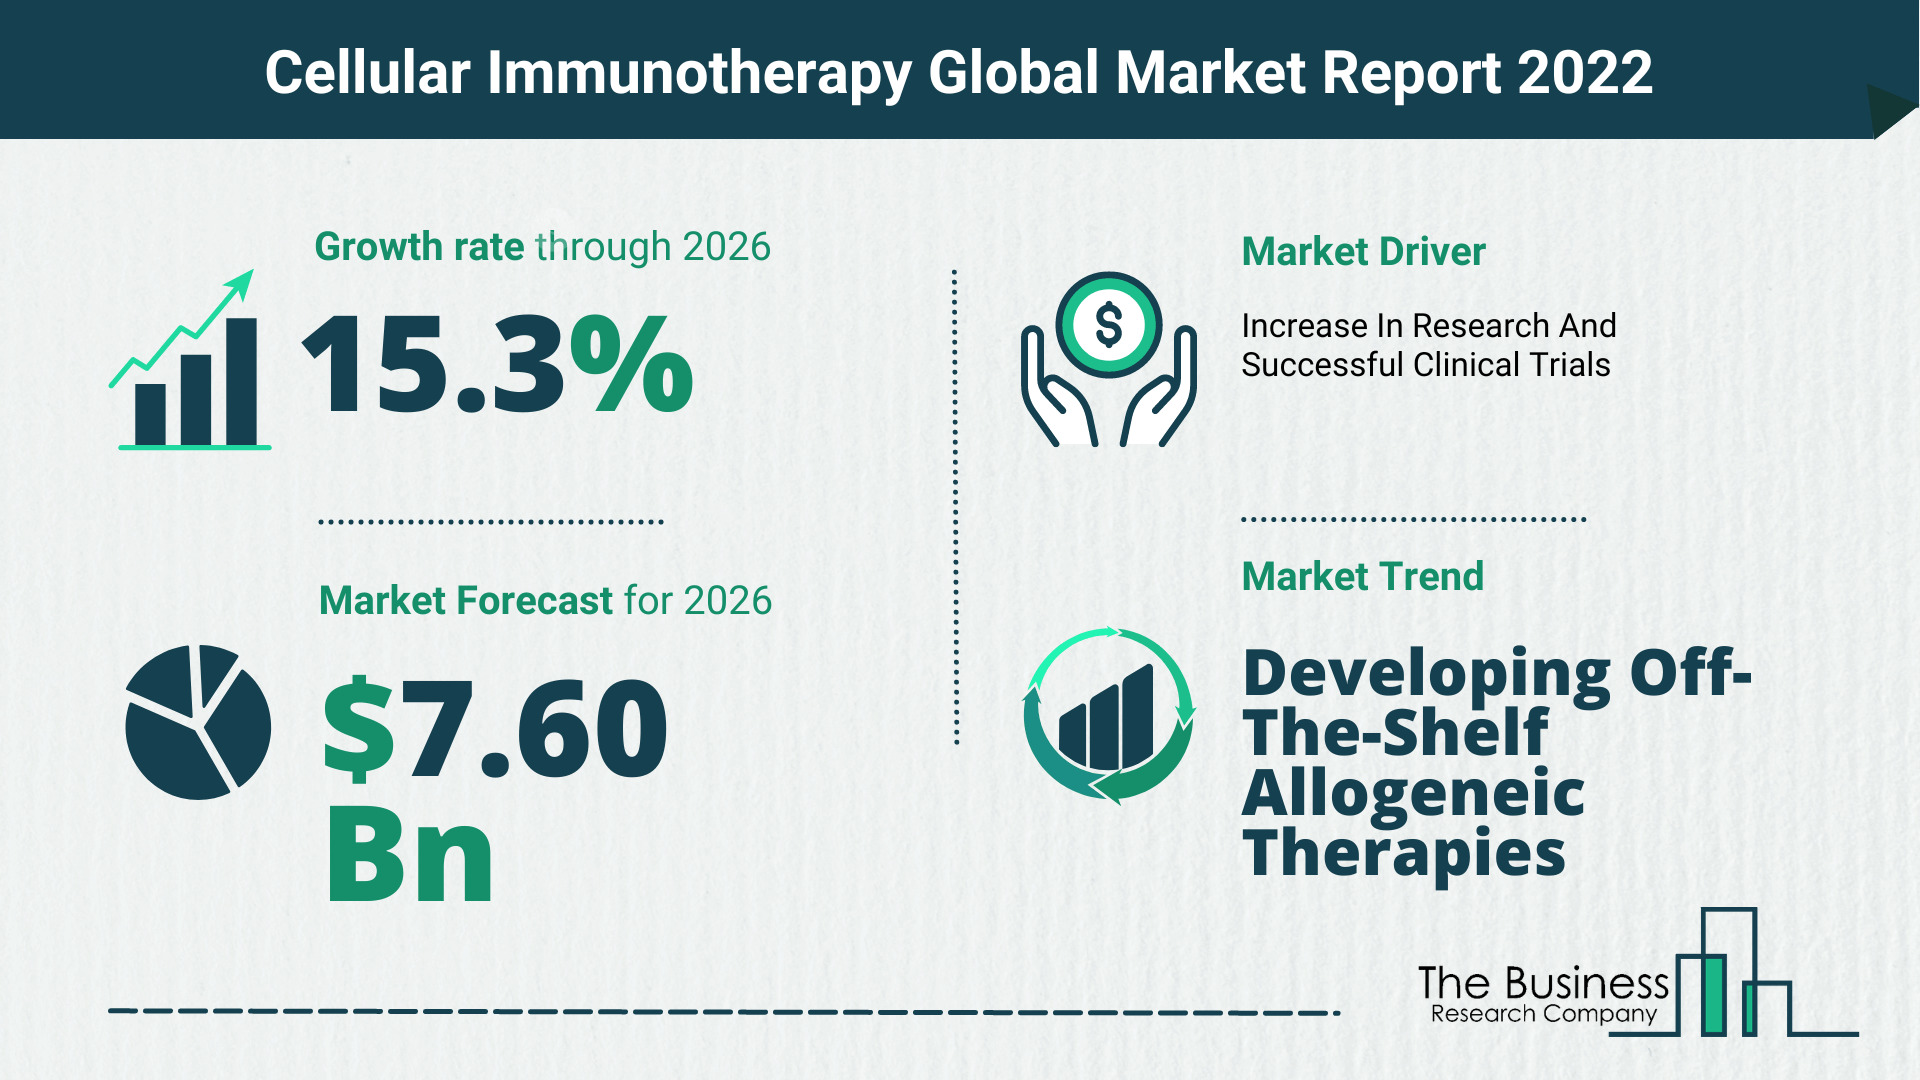 Global Cellular Immunotherapy Market